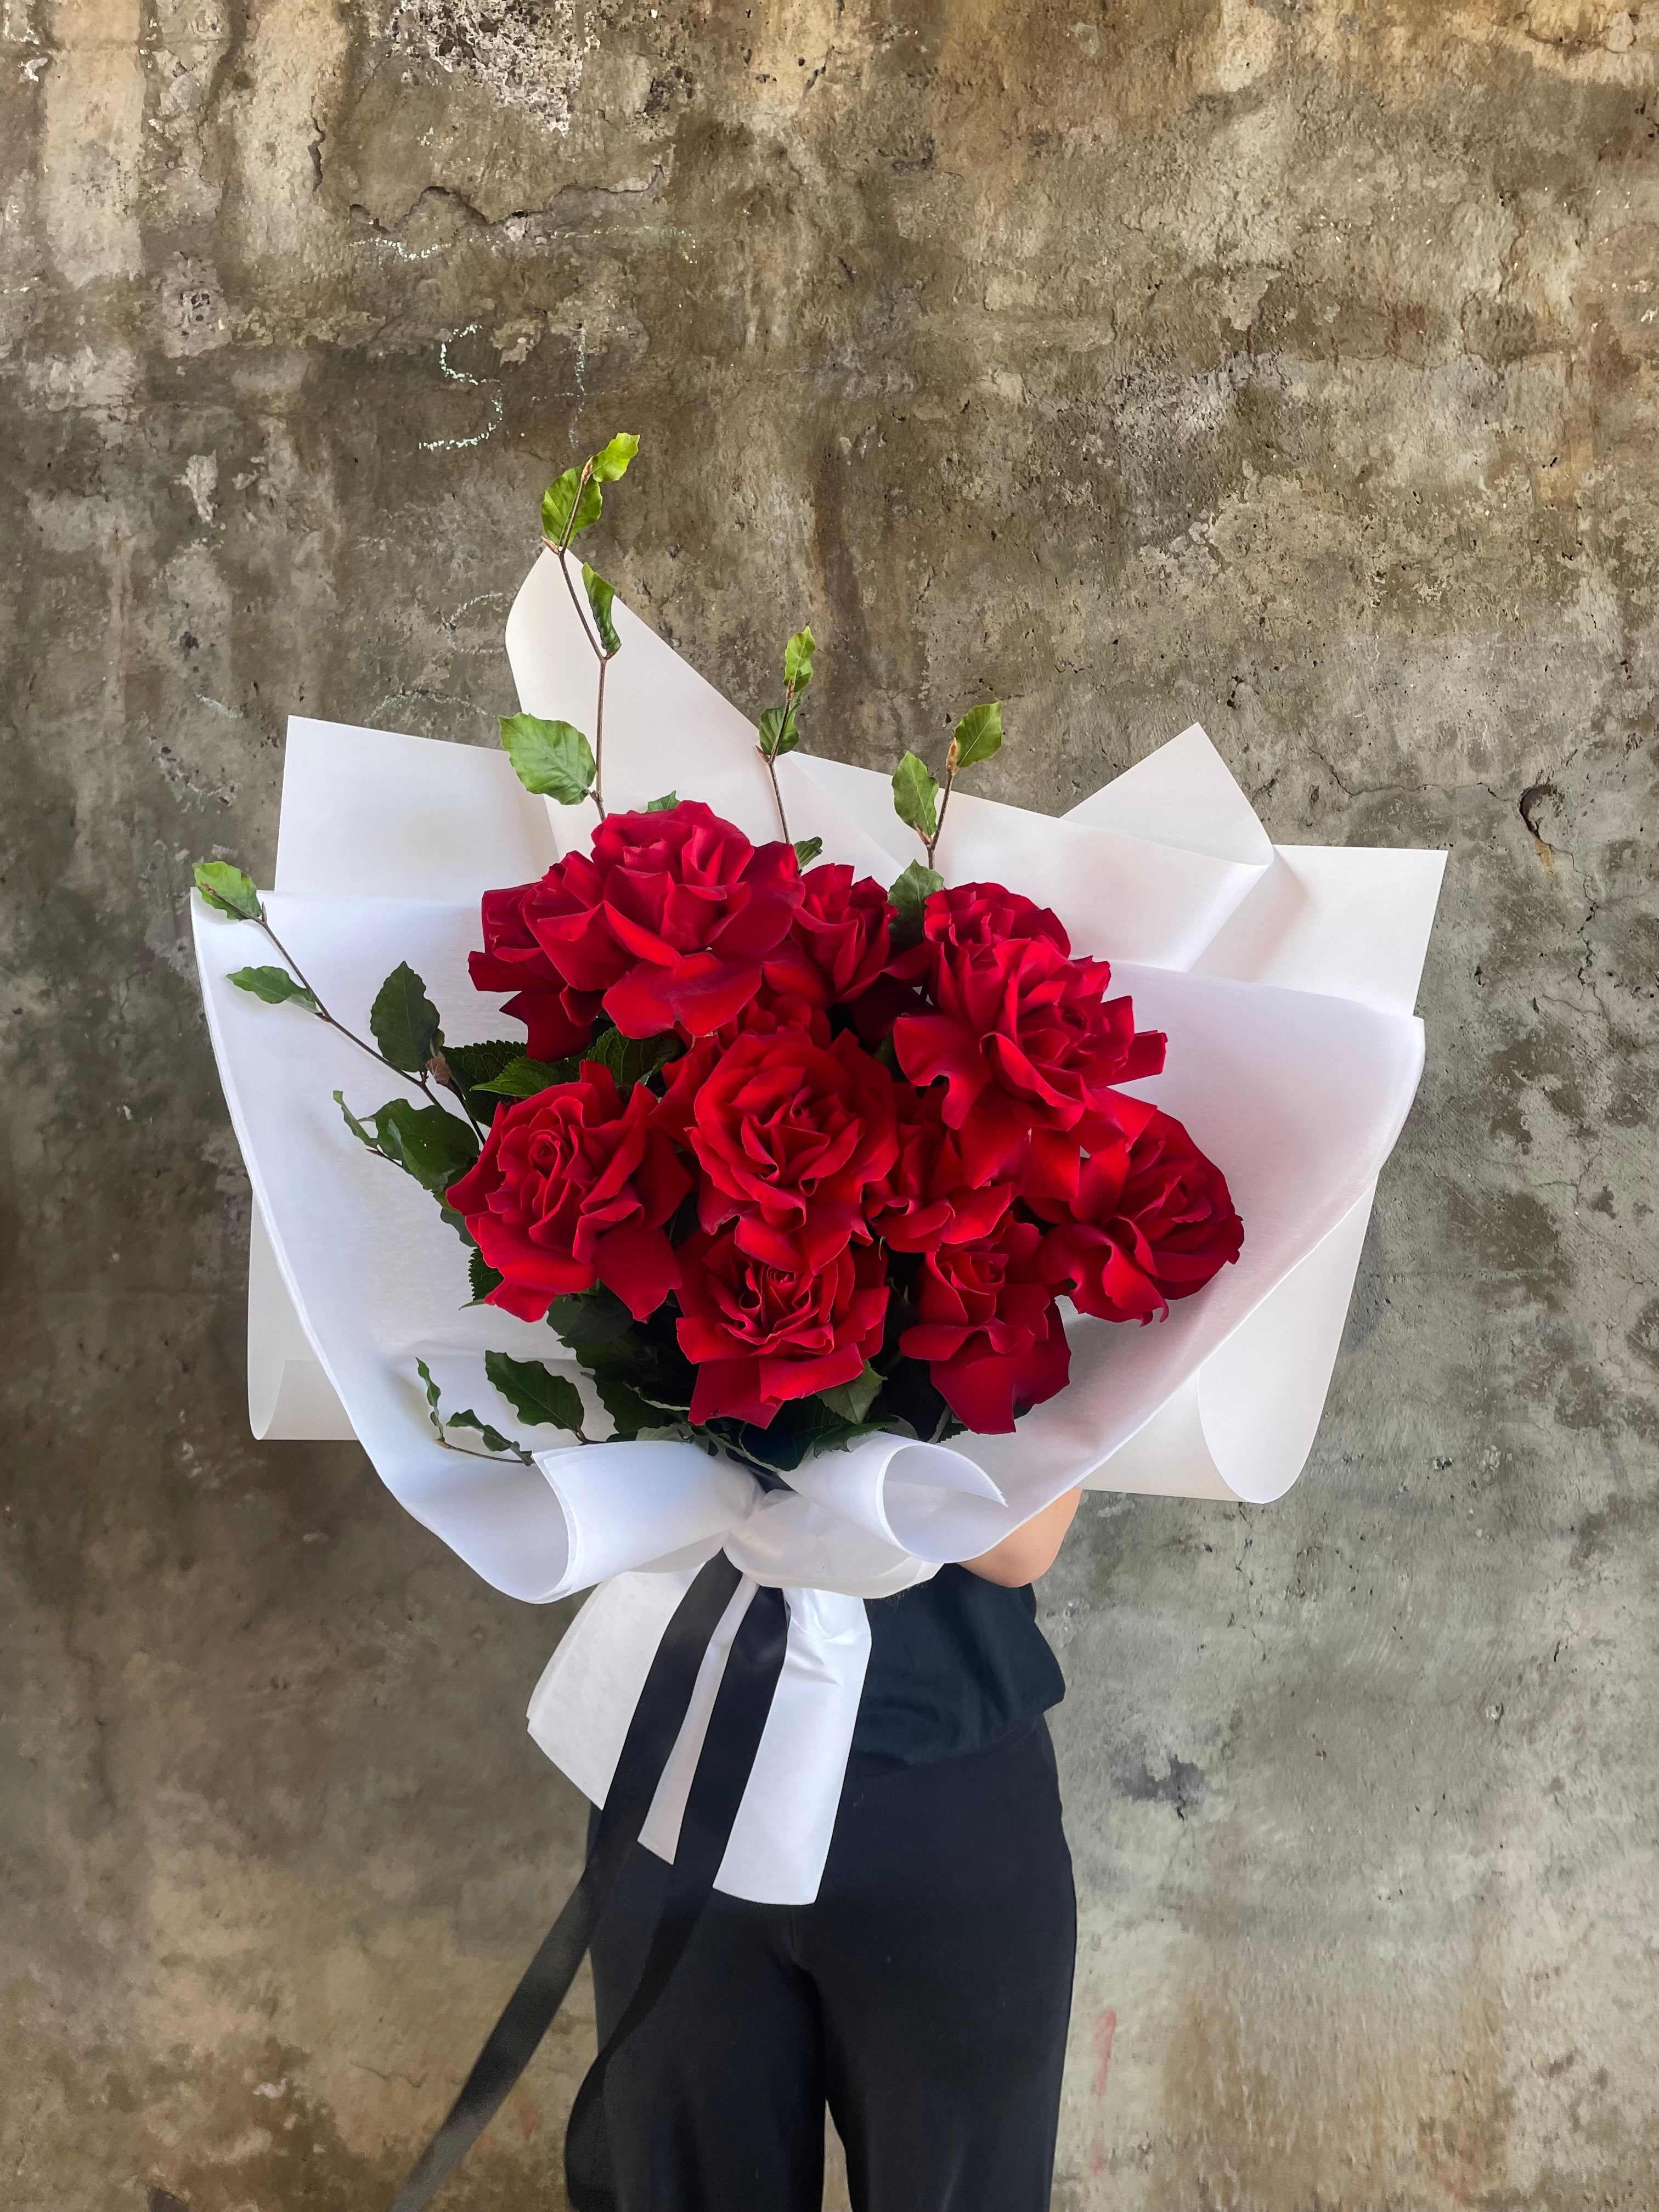 Bouquet of one dozen red roses and foliage. A luxe red rose bouquet designed with 12 premium red roses and foliages, beautifully wrapped with signature KHF wrapping. Florist holding the bouquet in front of a concrete wall.